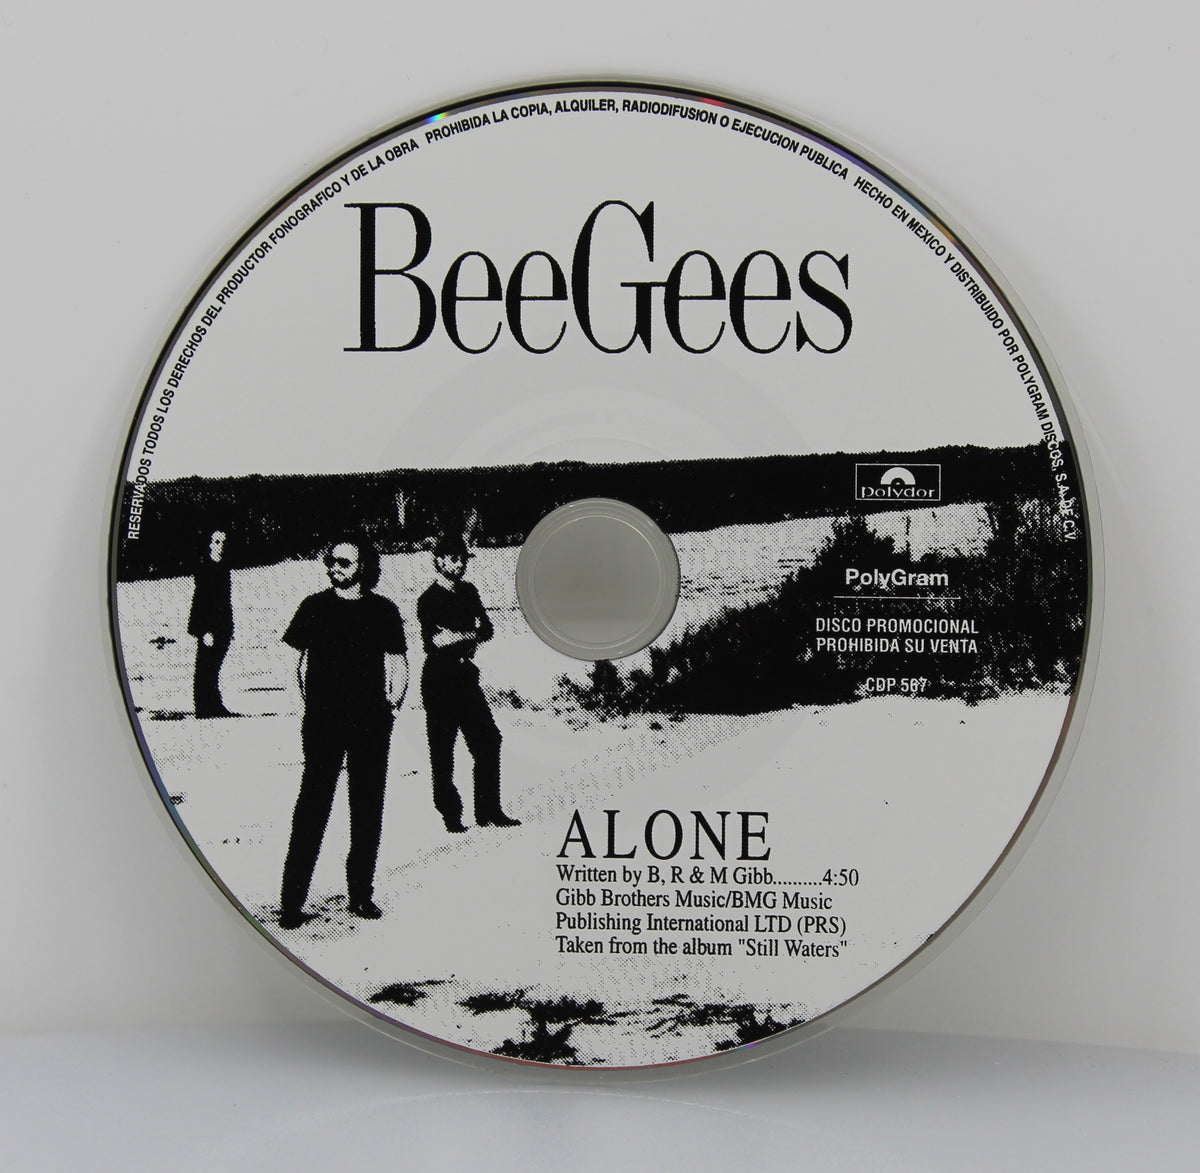 Bee Gees – Alone, CD, Single, Promo, Mexico 1997